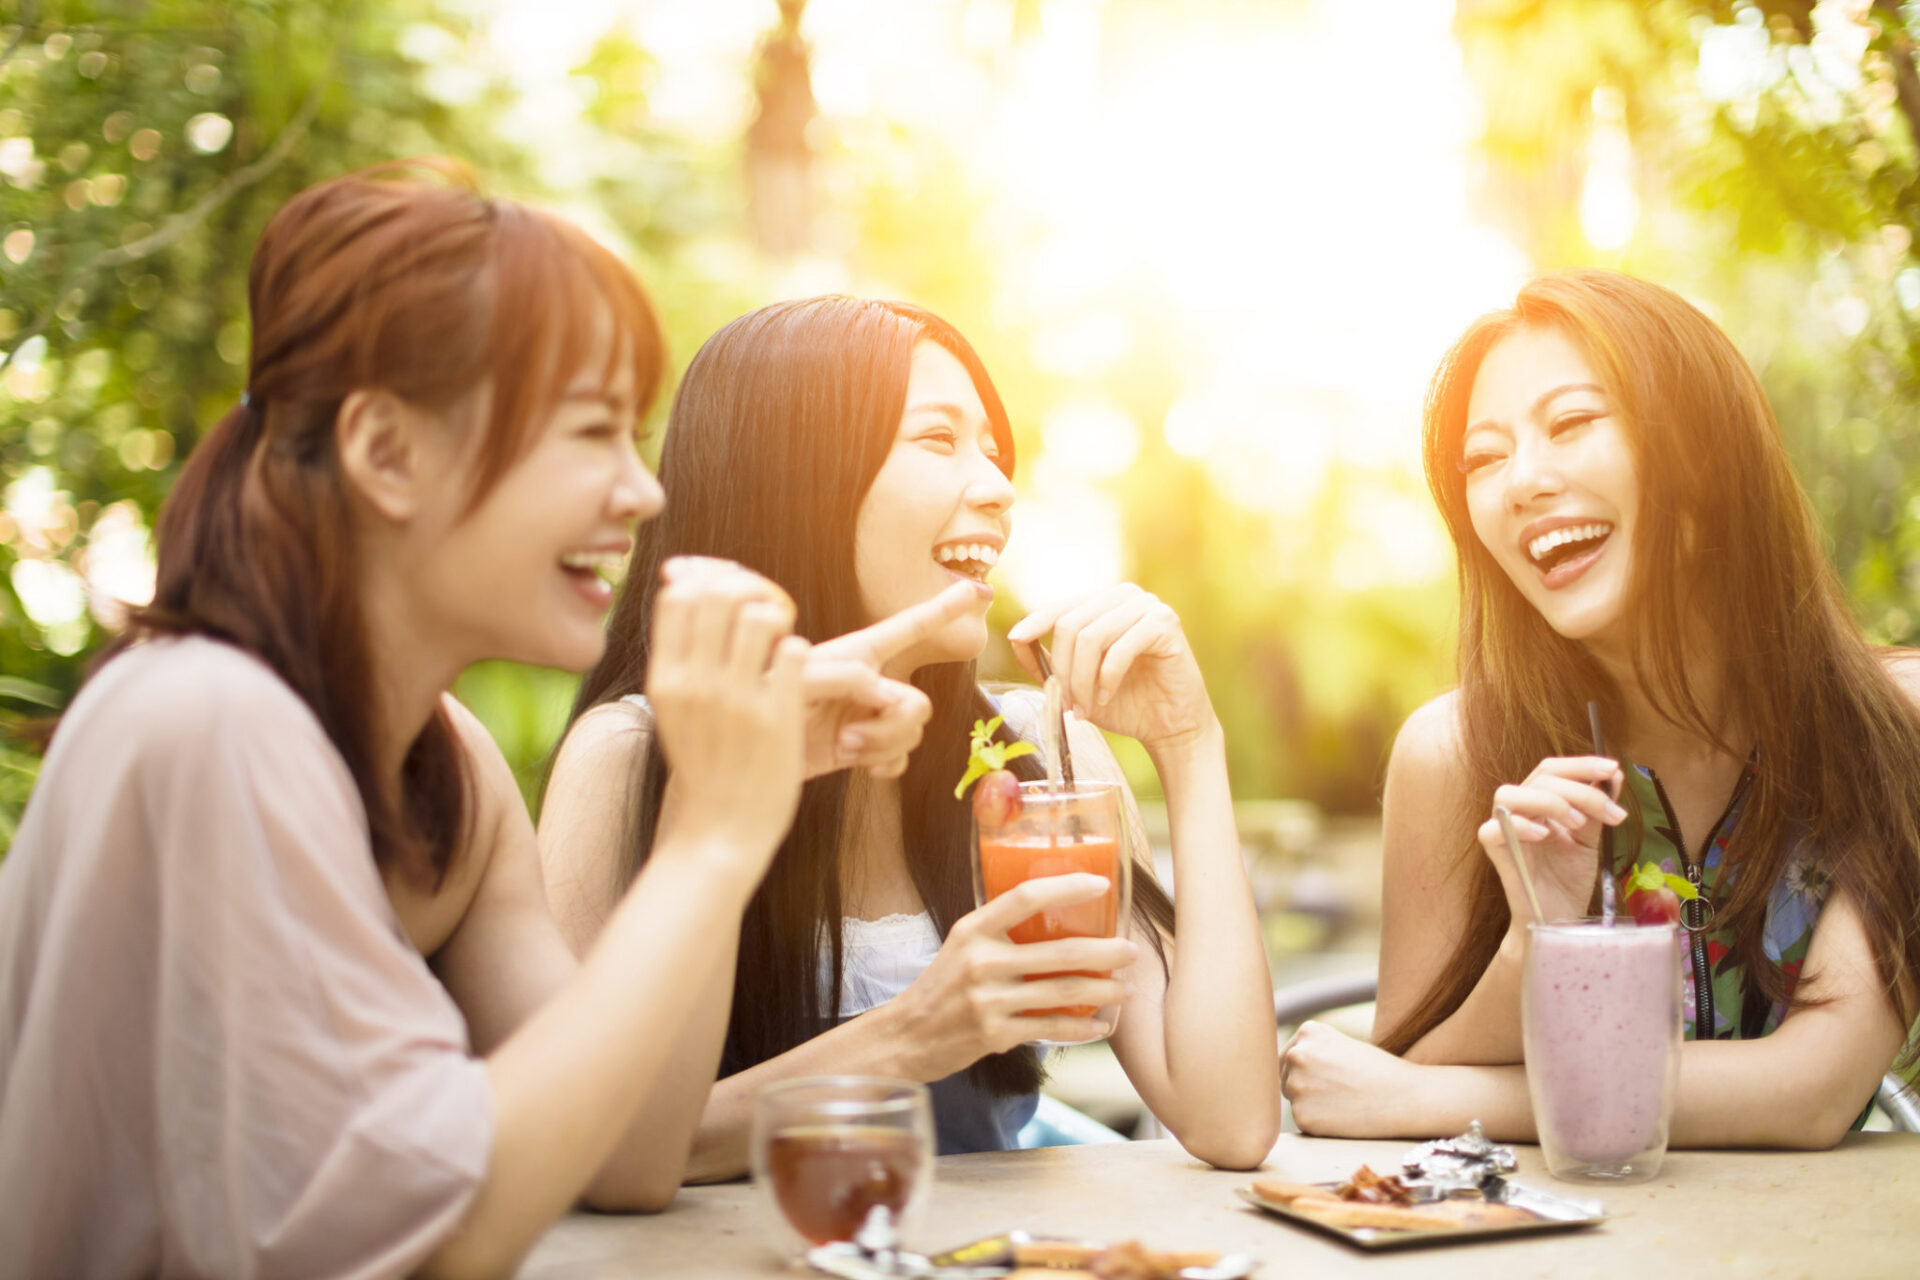 Group of young woman laughing in restaurant